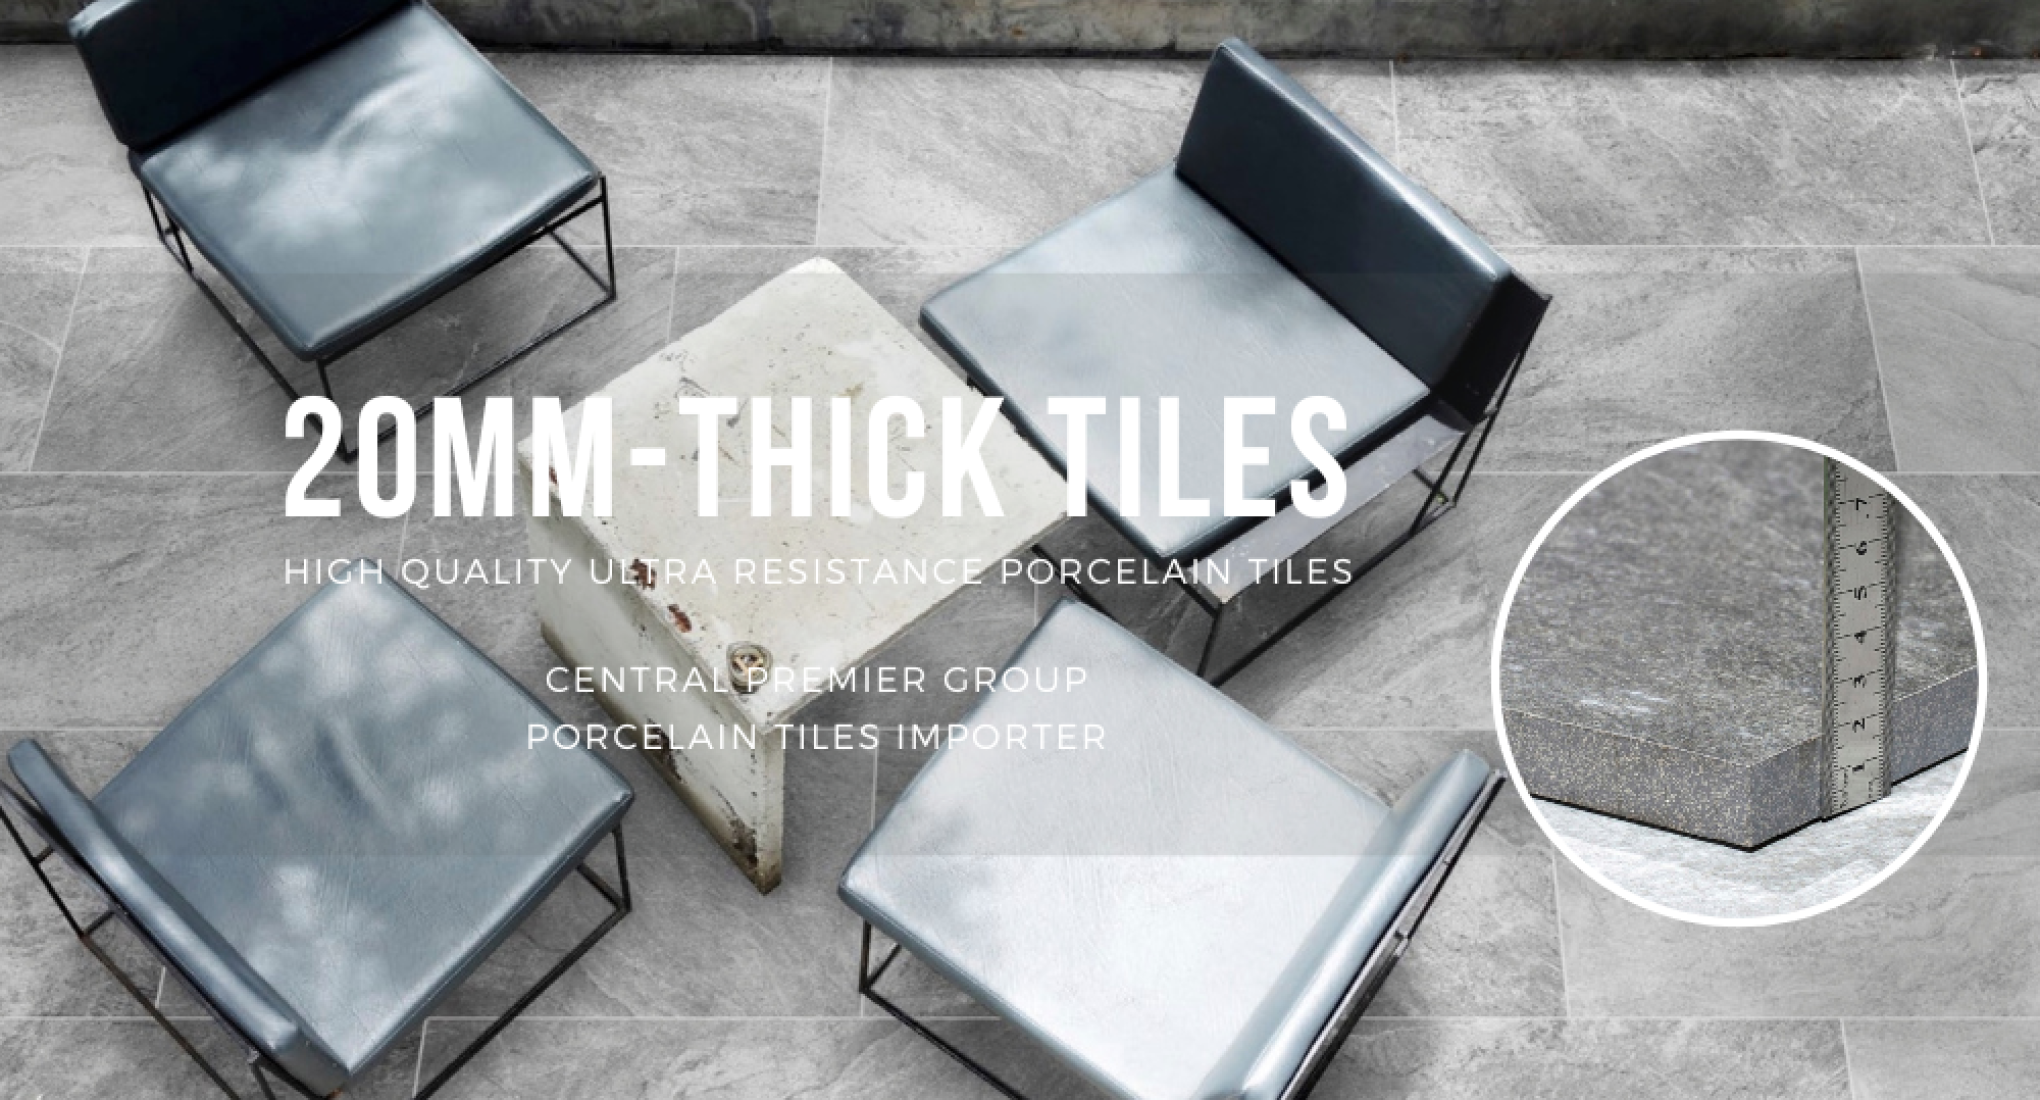 20MM-THICK TILES